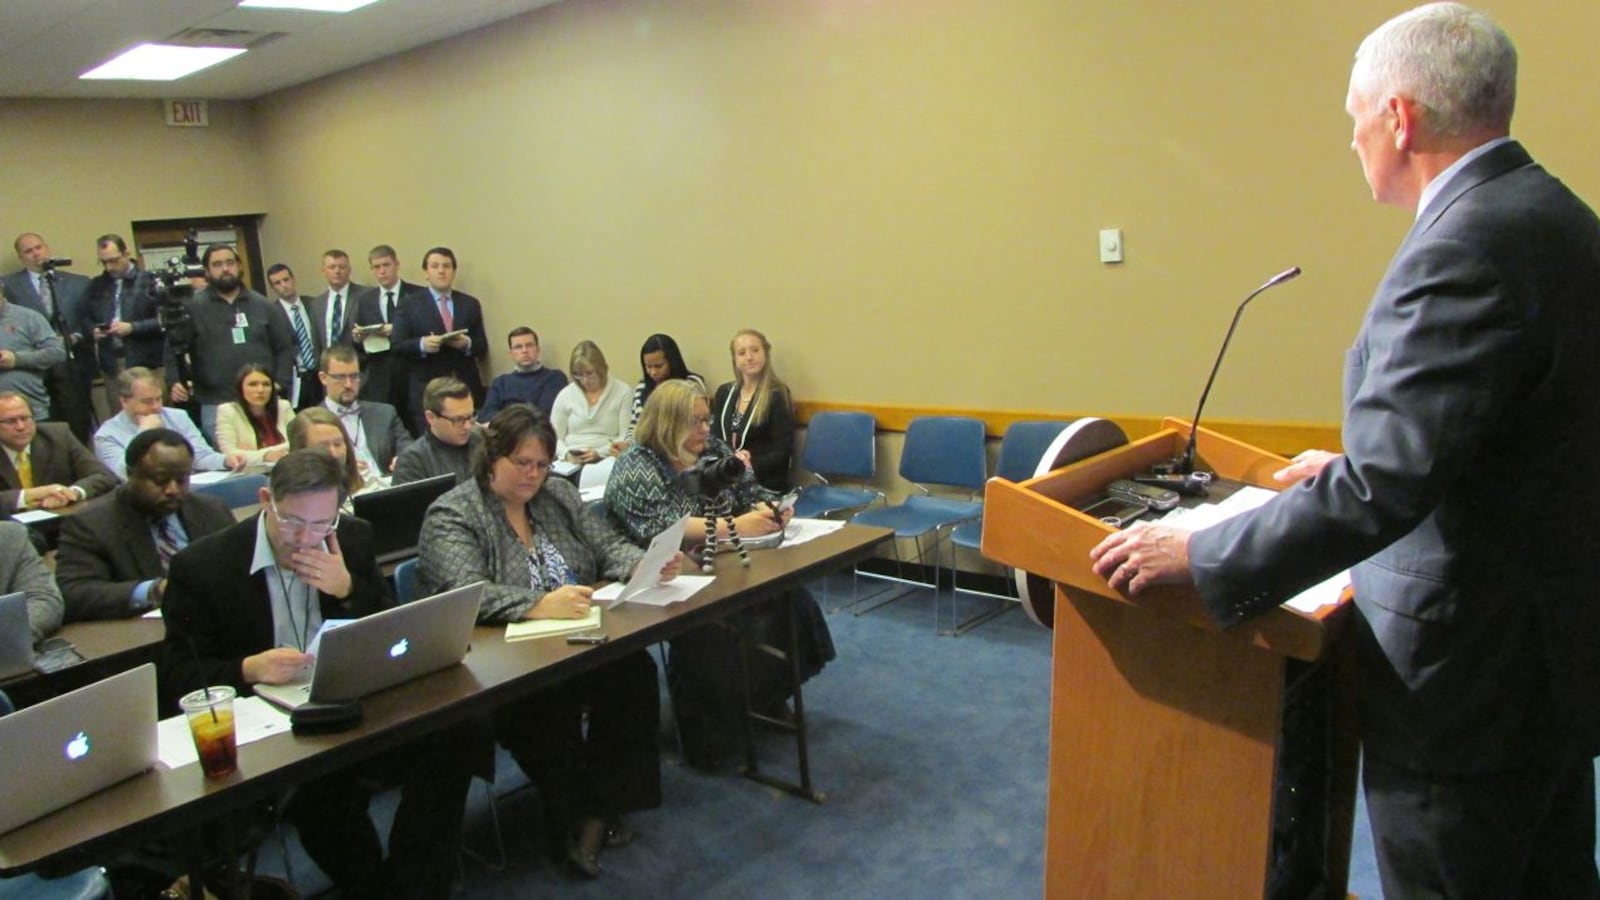 Gov. Mike Pence held his second press conference this week on ISTEP today at the Statehouse.